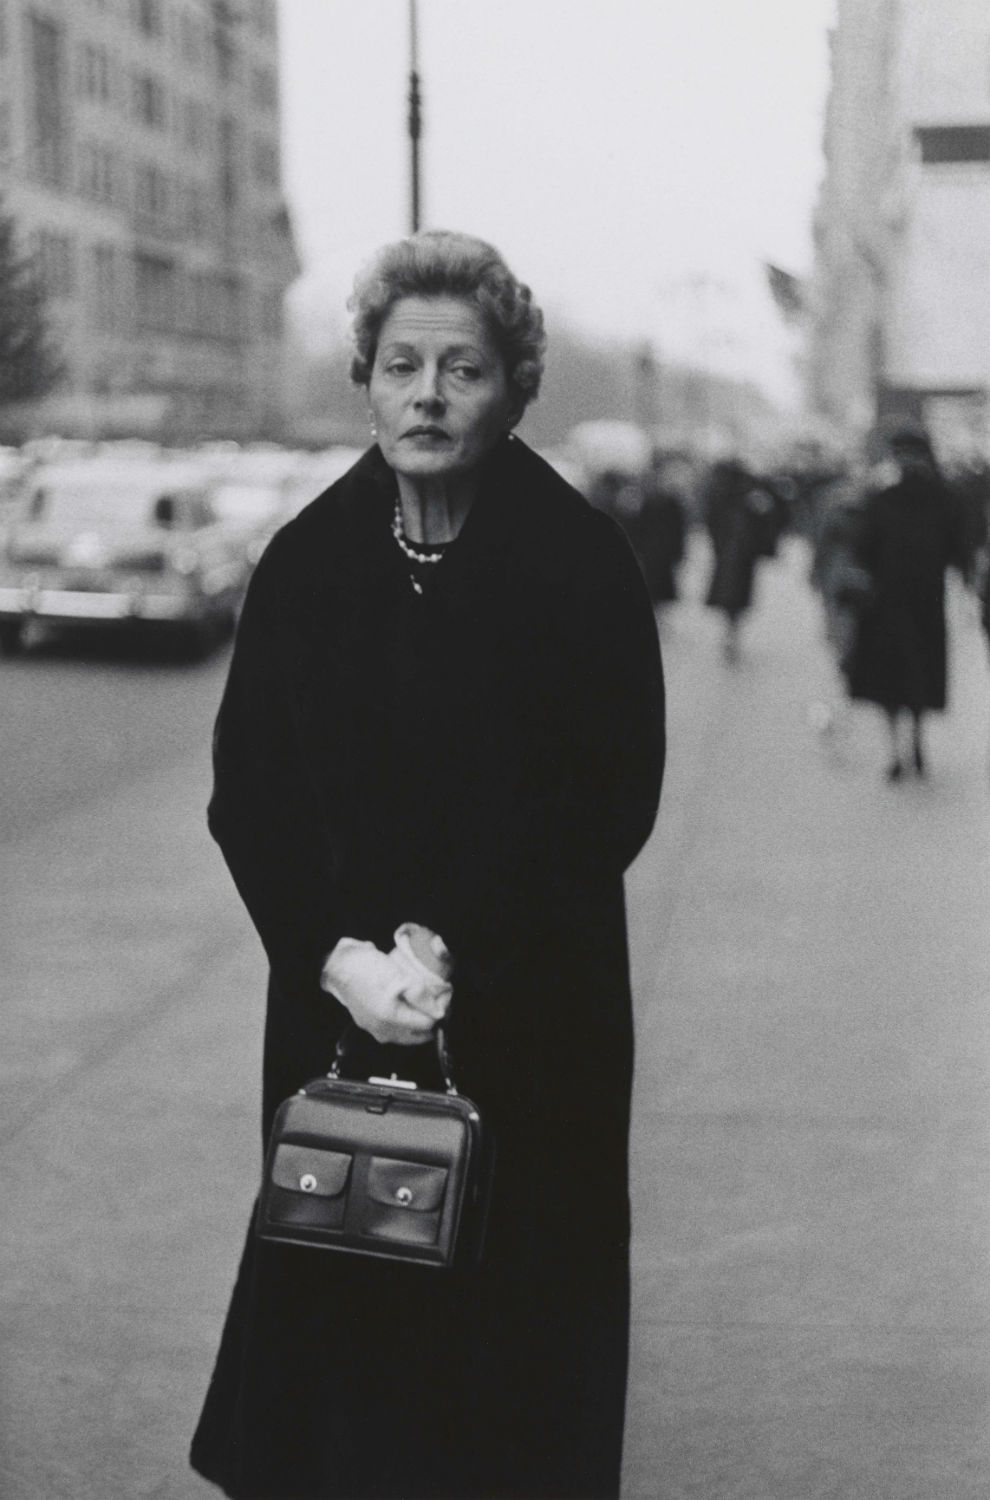 Woman with white gloves and a pocket book, N.Y.C. 1956